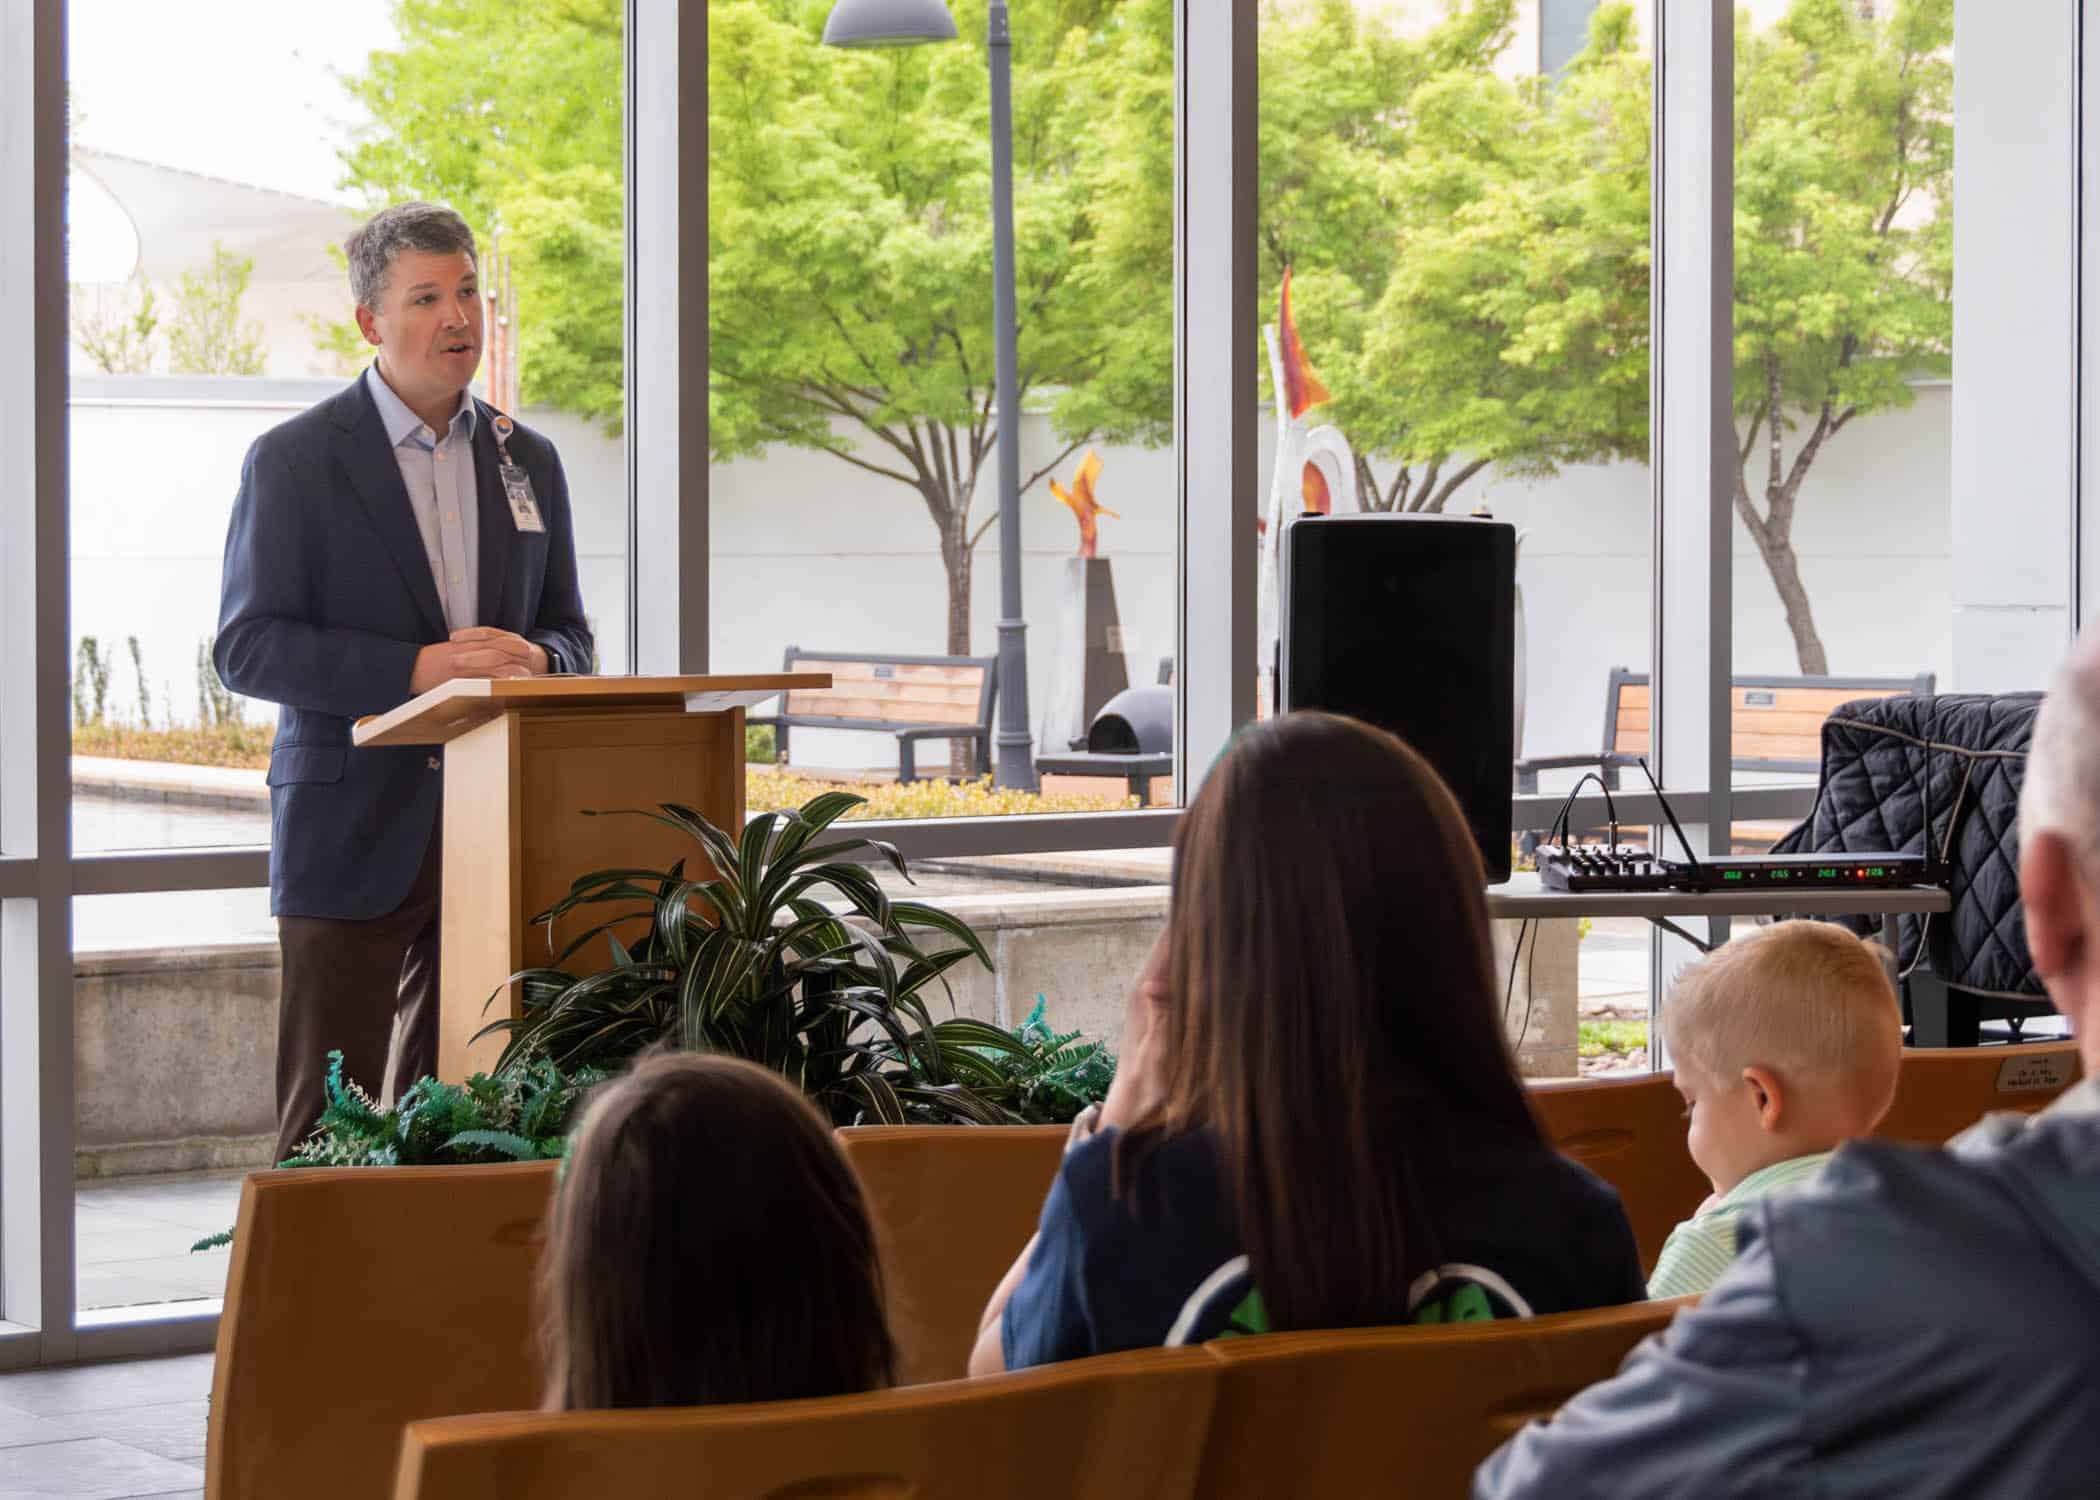 ECU Health Medical Center President Jay Briley gives opening remarks during the Pause to Give Life event at ECU Health Medical Center's Interfaith Chapel.